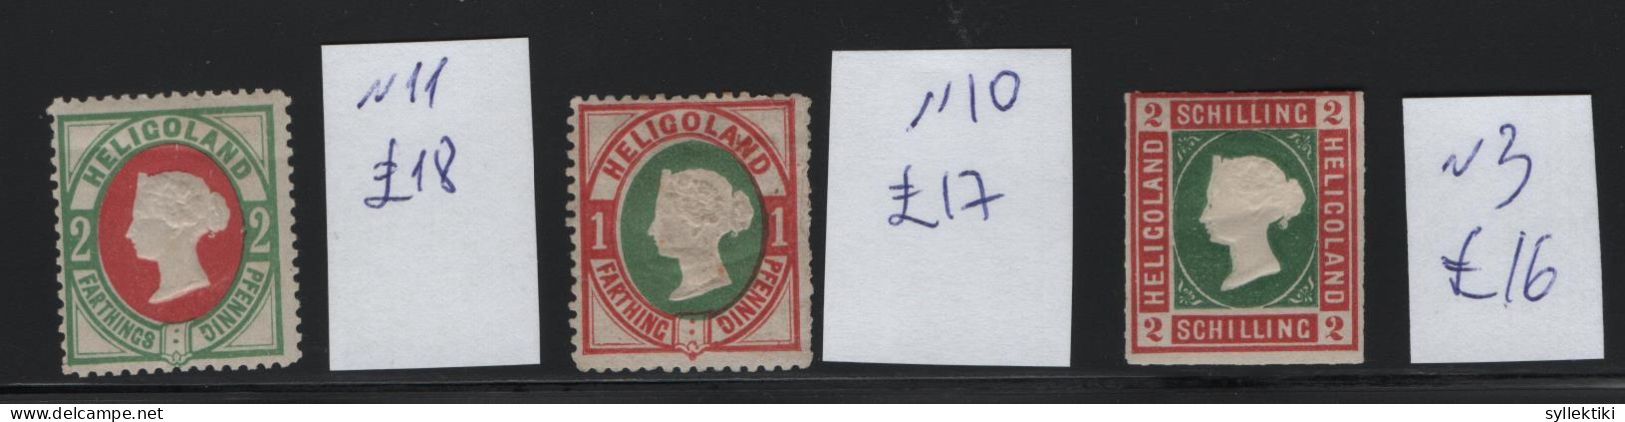 HELIGOLAND 1869/1875 3 DIFFERENT MH STAMPS S.G. No 3, 10, 11 AND VALUE GBP 51,00 - Heligoland (1867-1890)